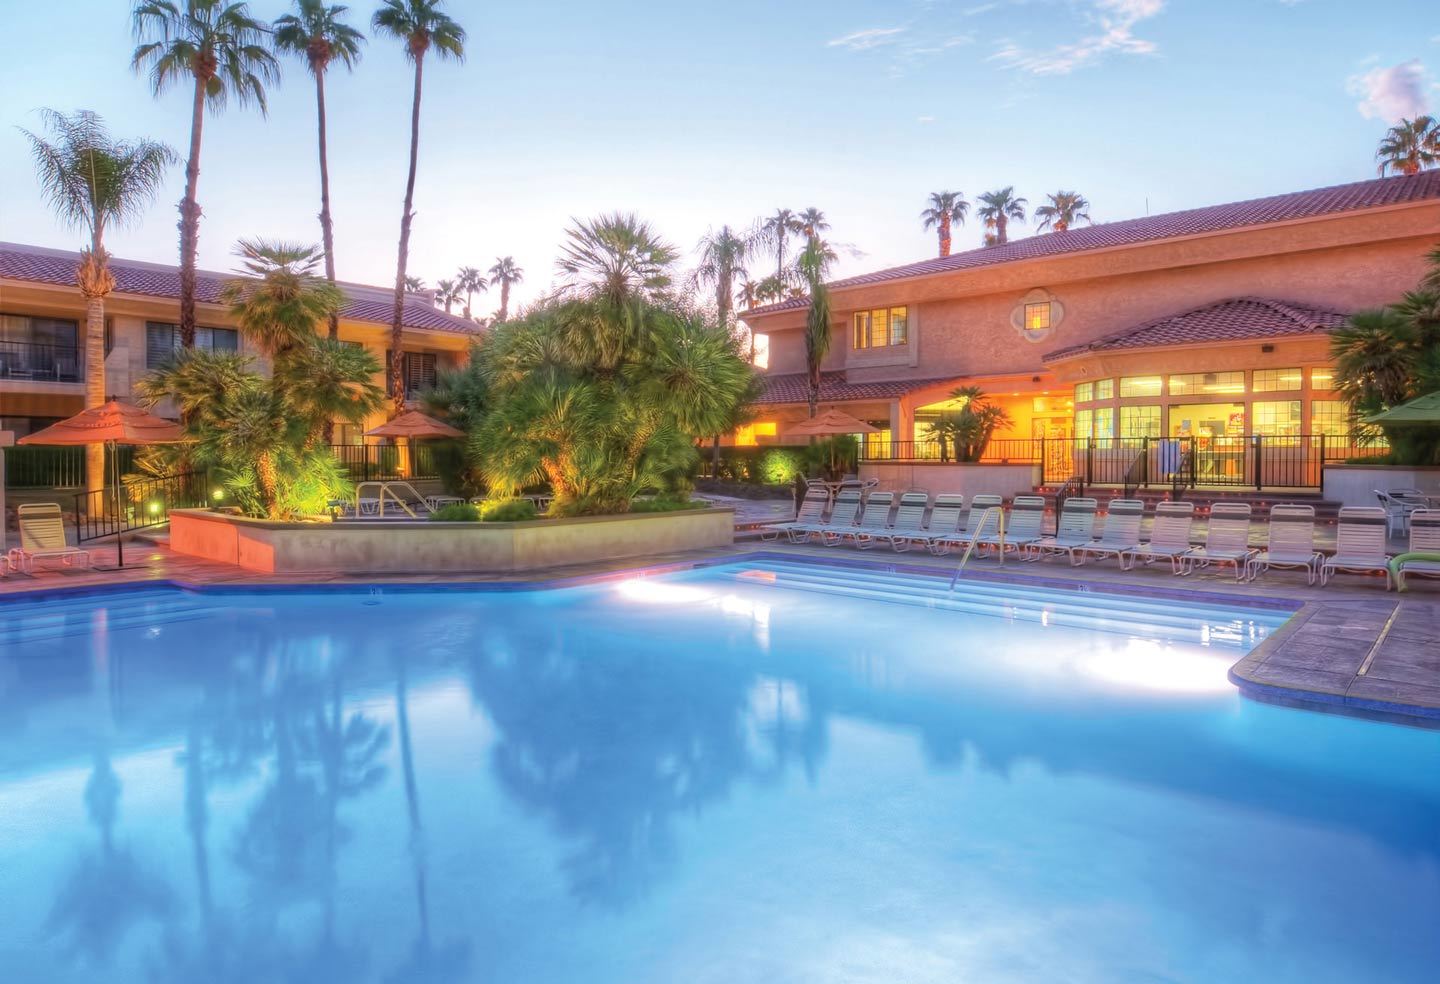 Photo of Hyatt Vacation Club at Desert Oasis, Cathedral City, CA